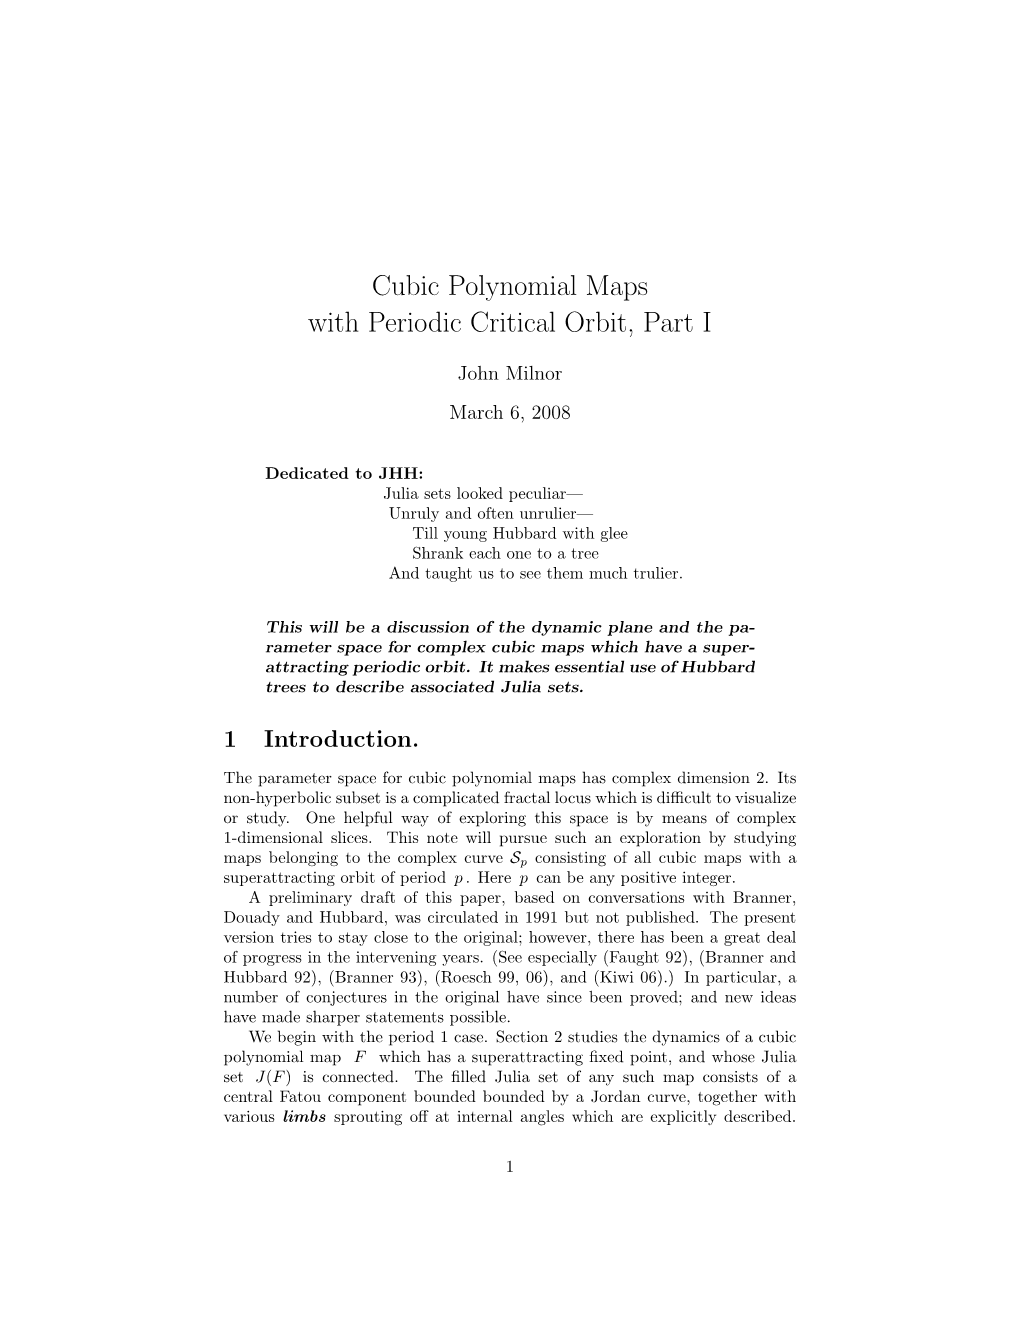 Cubic Polynomial Maps with Periodic Critical Orbit, Part I